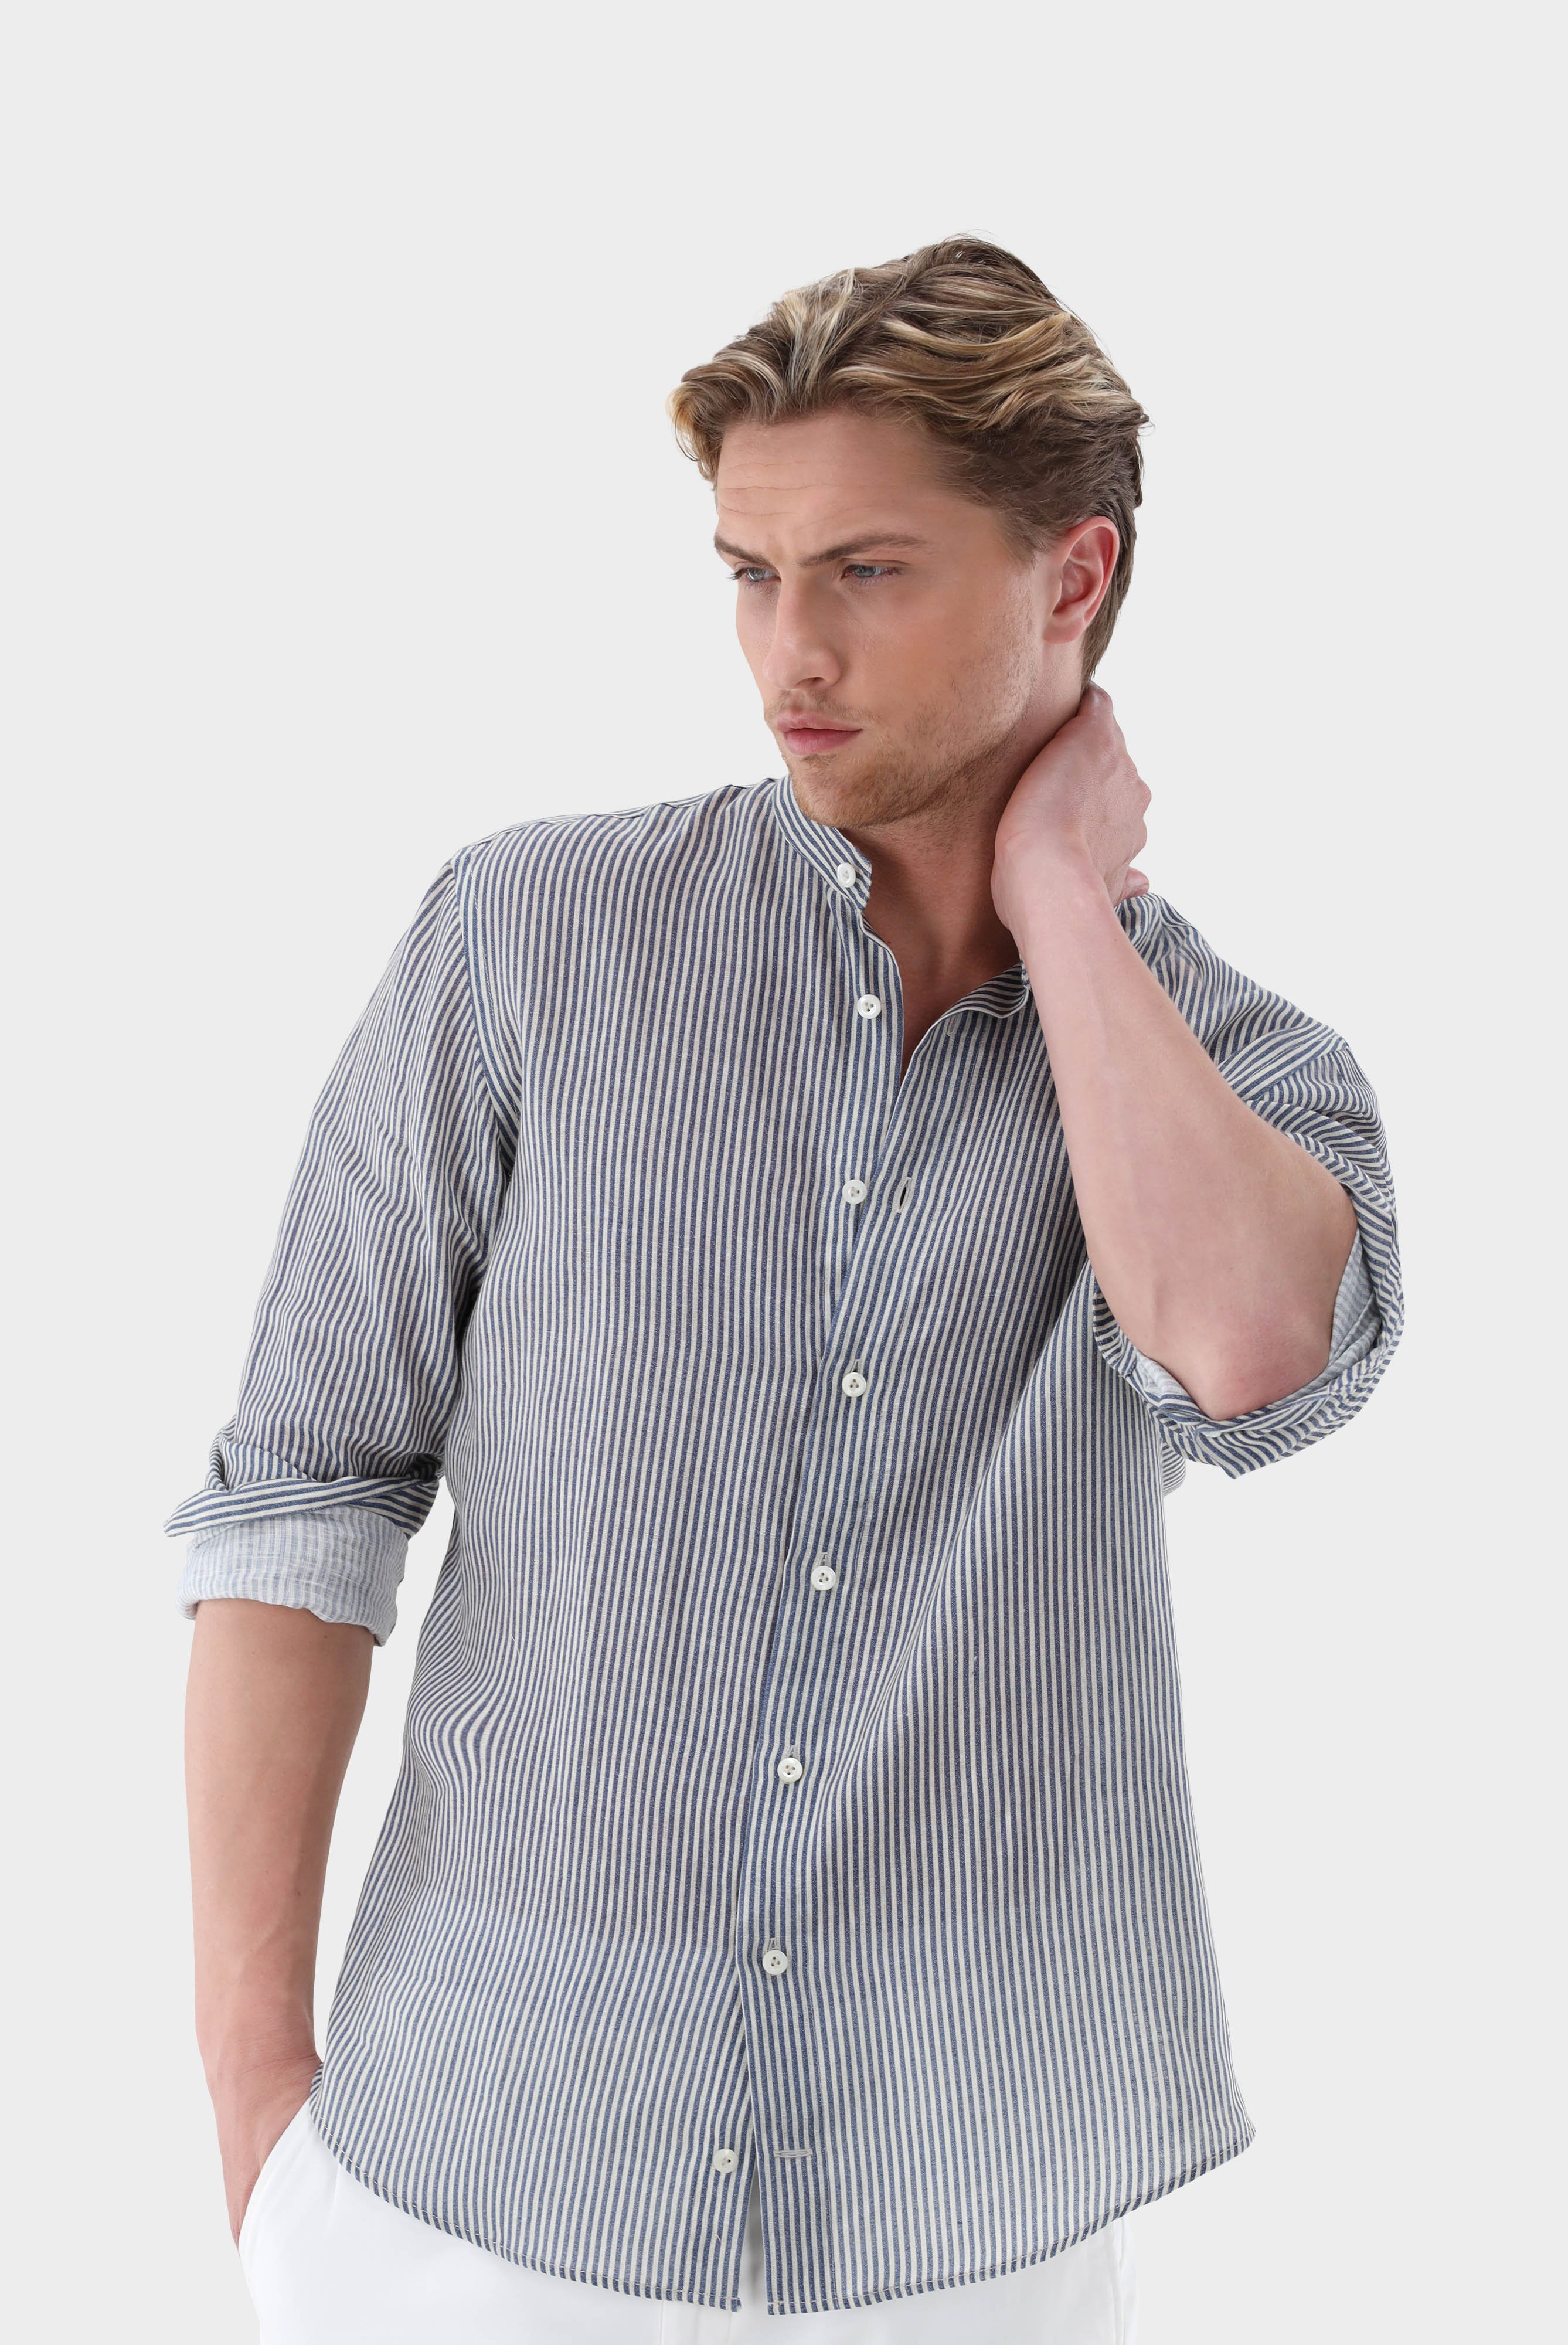 Casual Shirts+Linen Shirt with Stripe Print Tailor Fit+20.2041.9V.170355.761.38